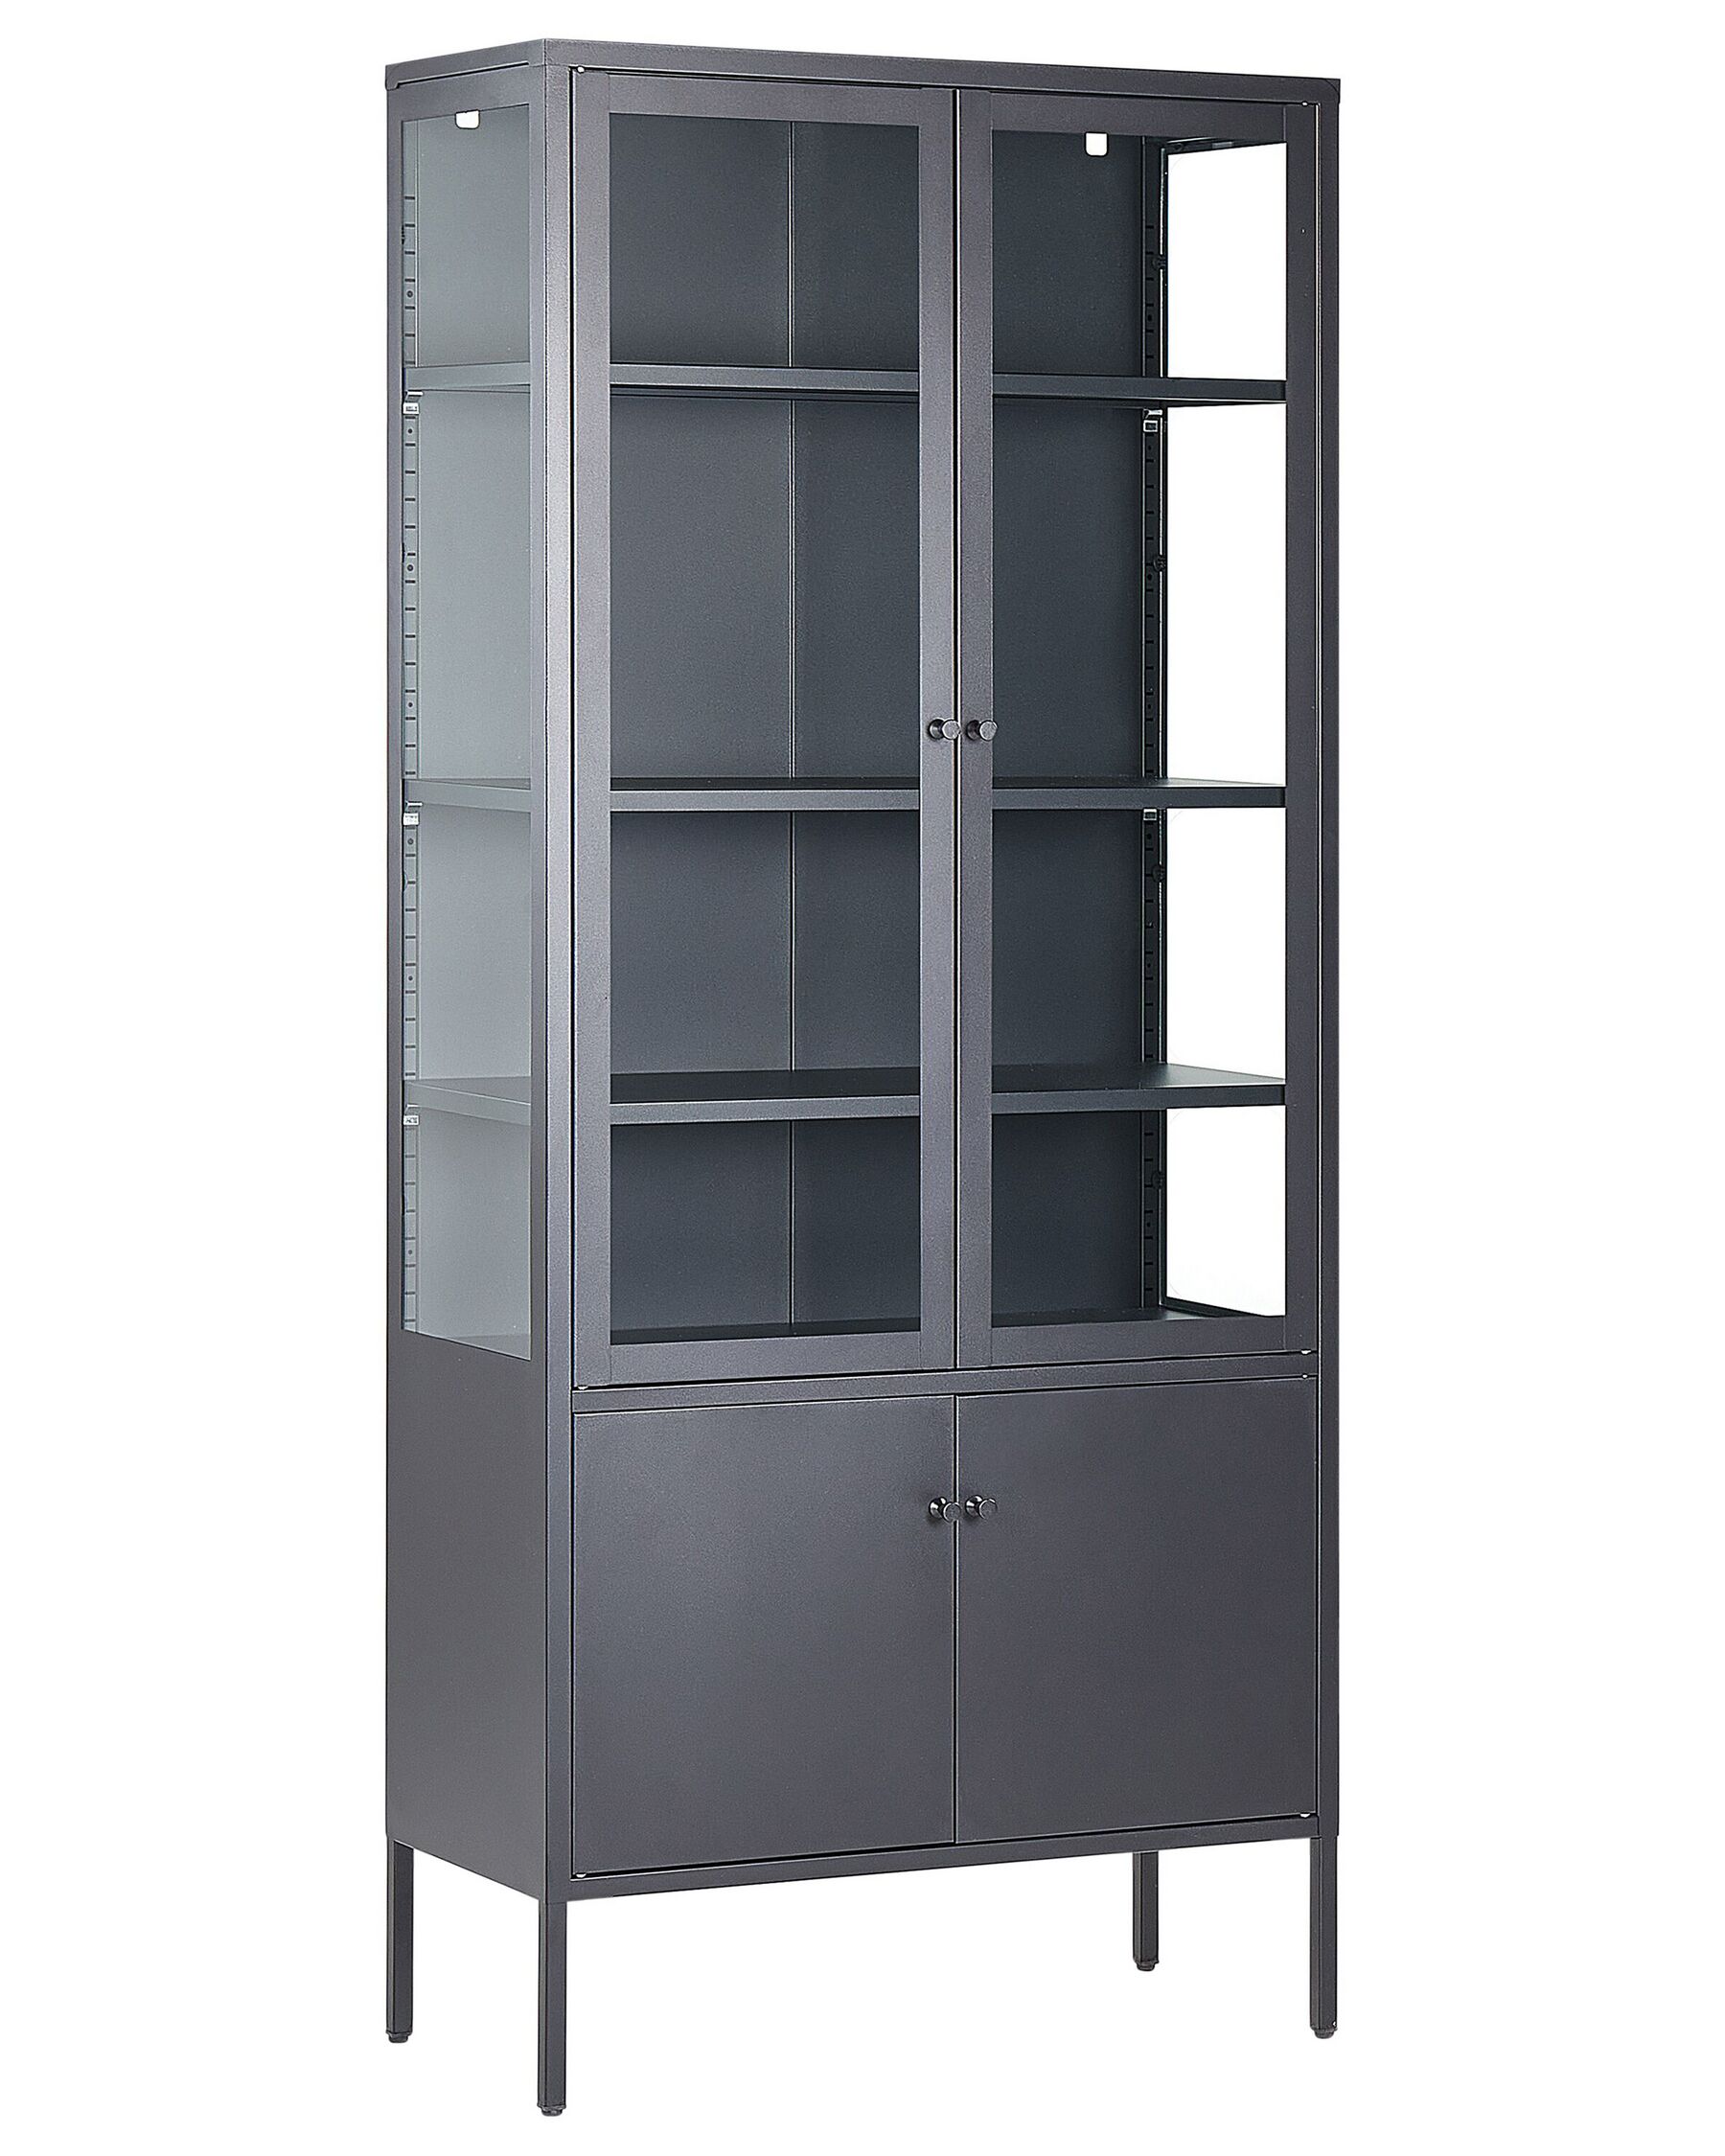 Steel Display Cabinet Black OXTED_850456